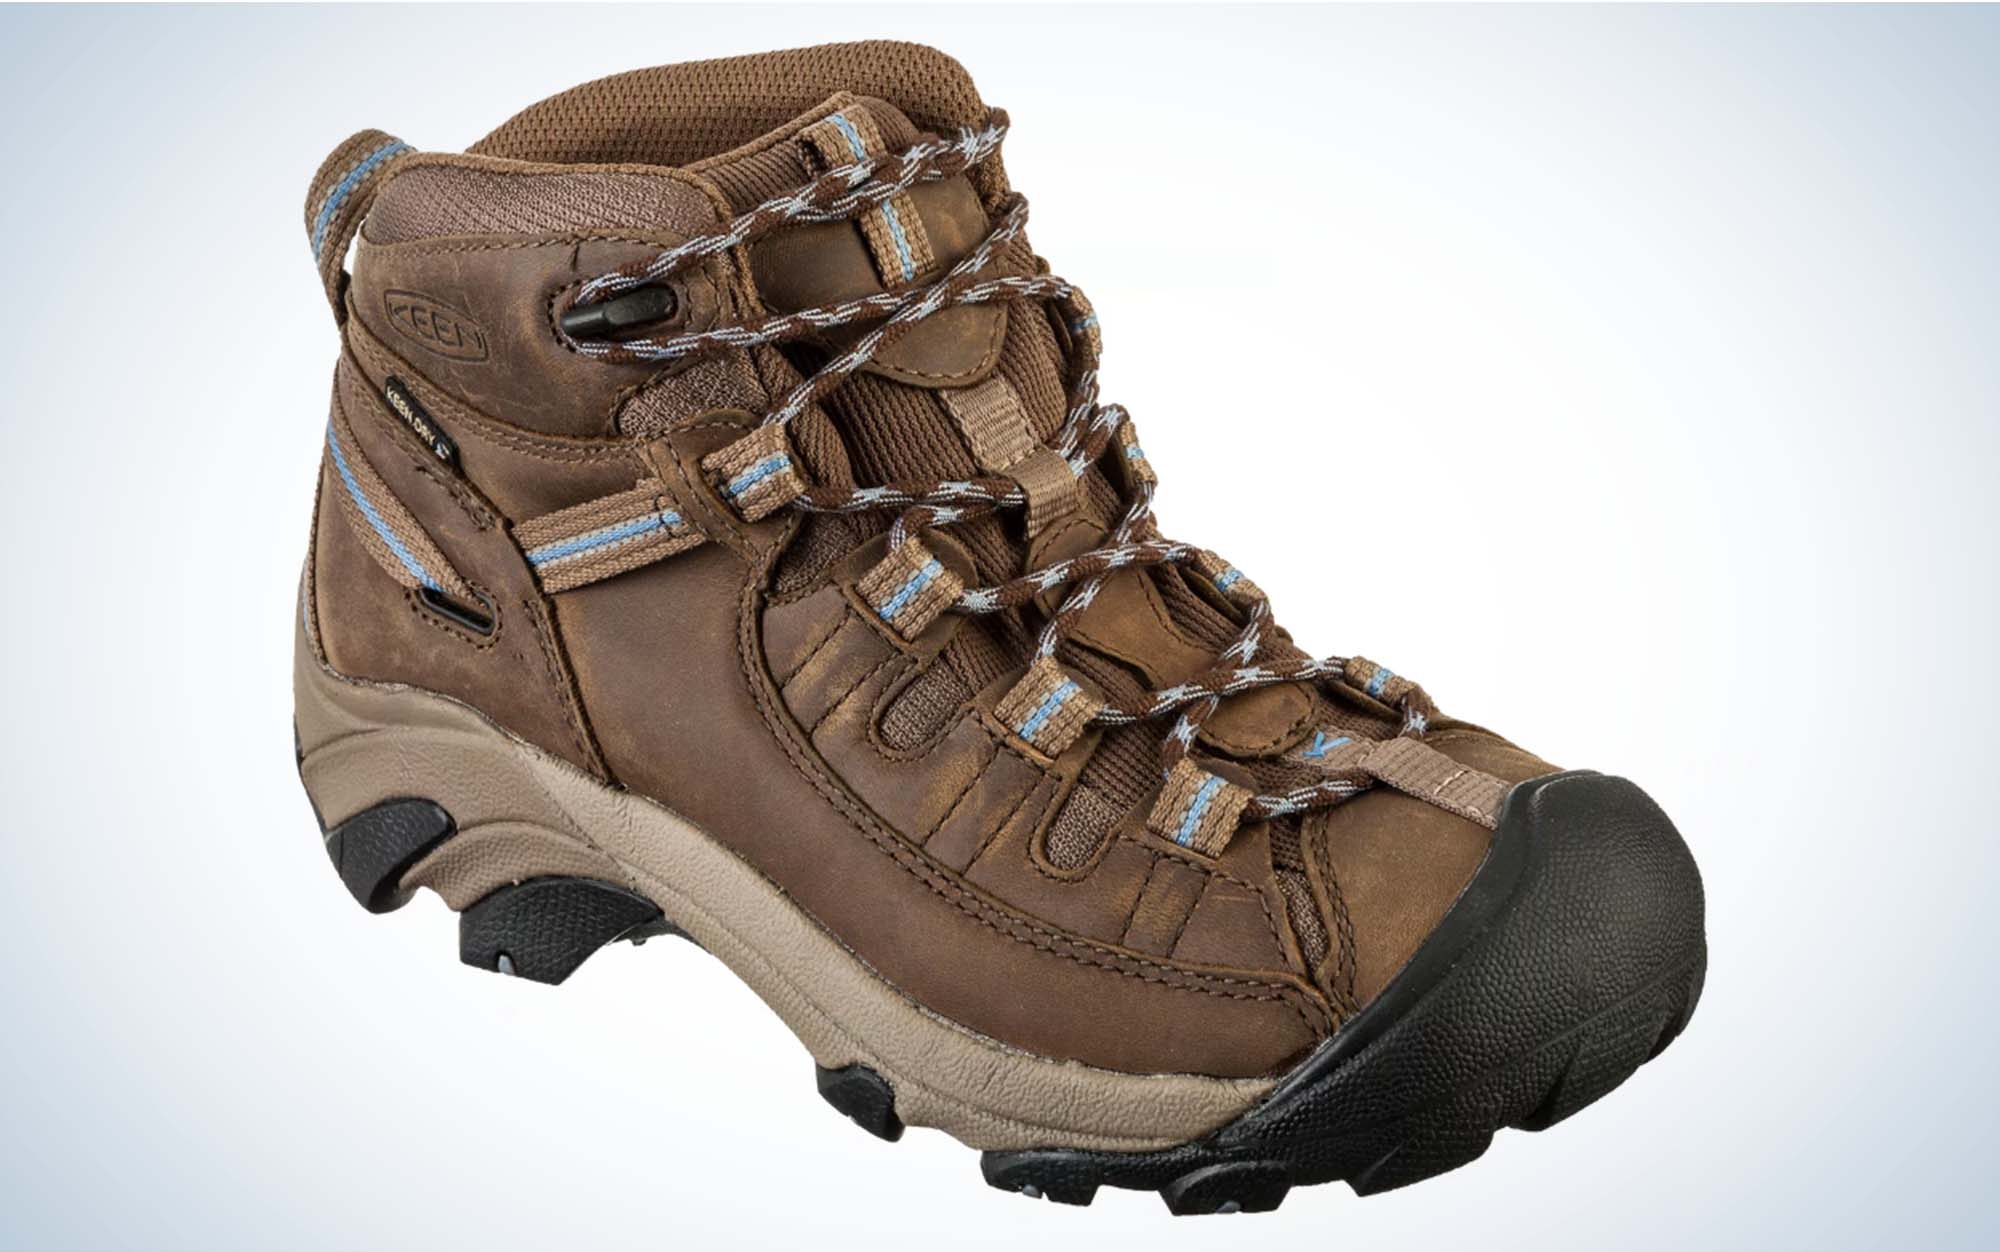 The KEEN Targhee II Waterproof Mid Hiking Boots are the best hiking boots for women with wide feet.